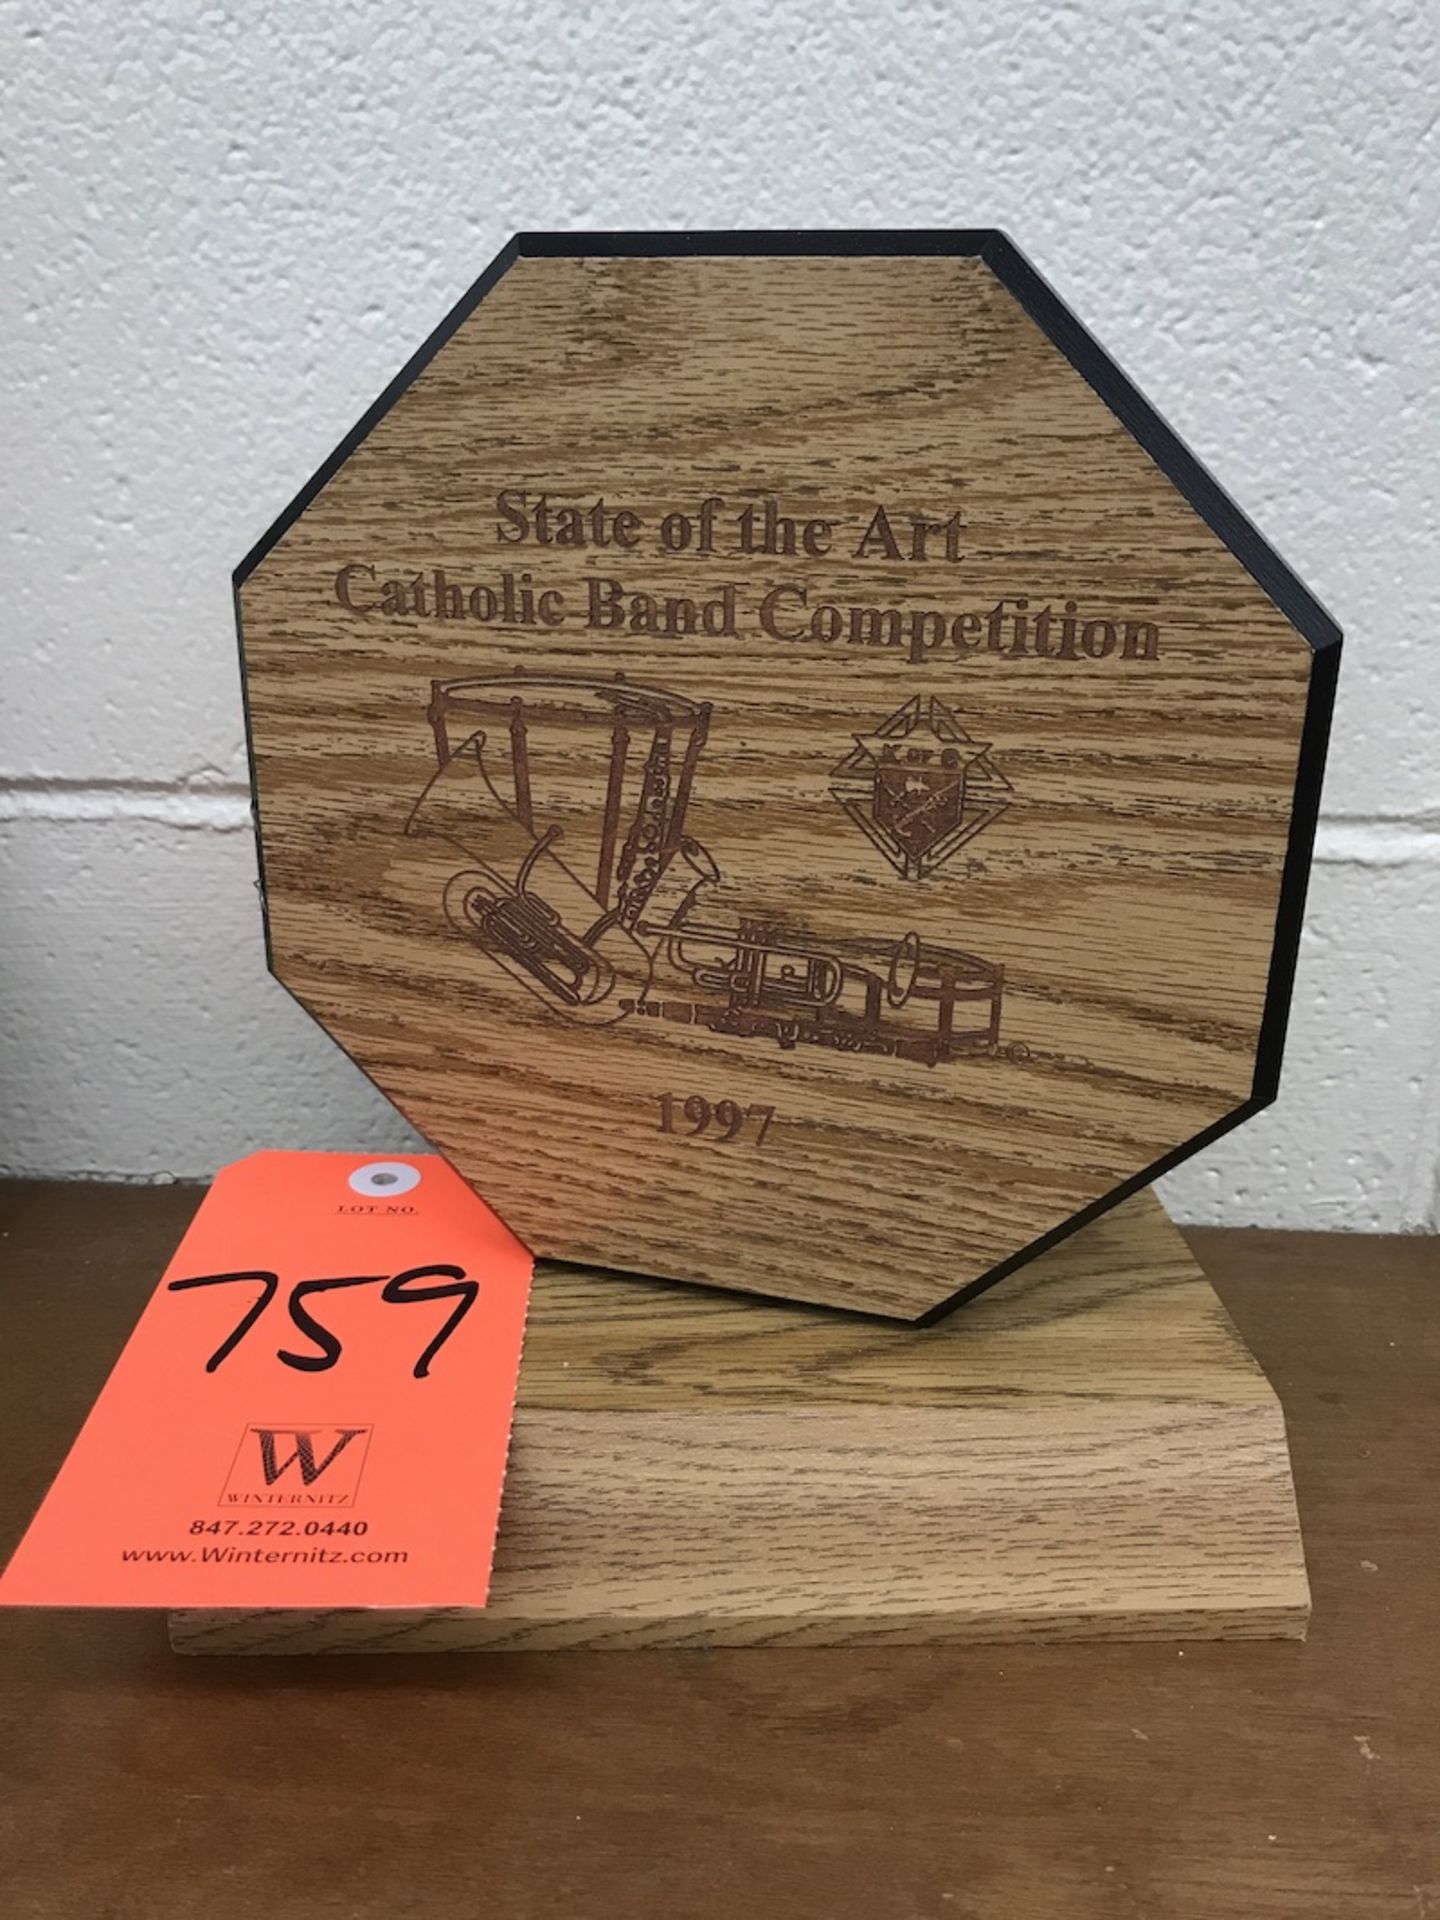 1997 State of the Art Catholic Band Competition Wood Plaque (Music Room)